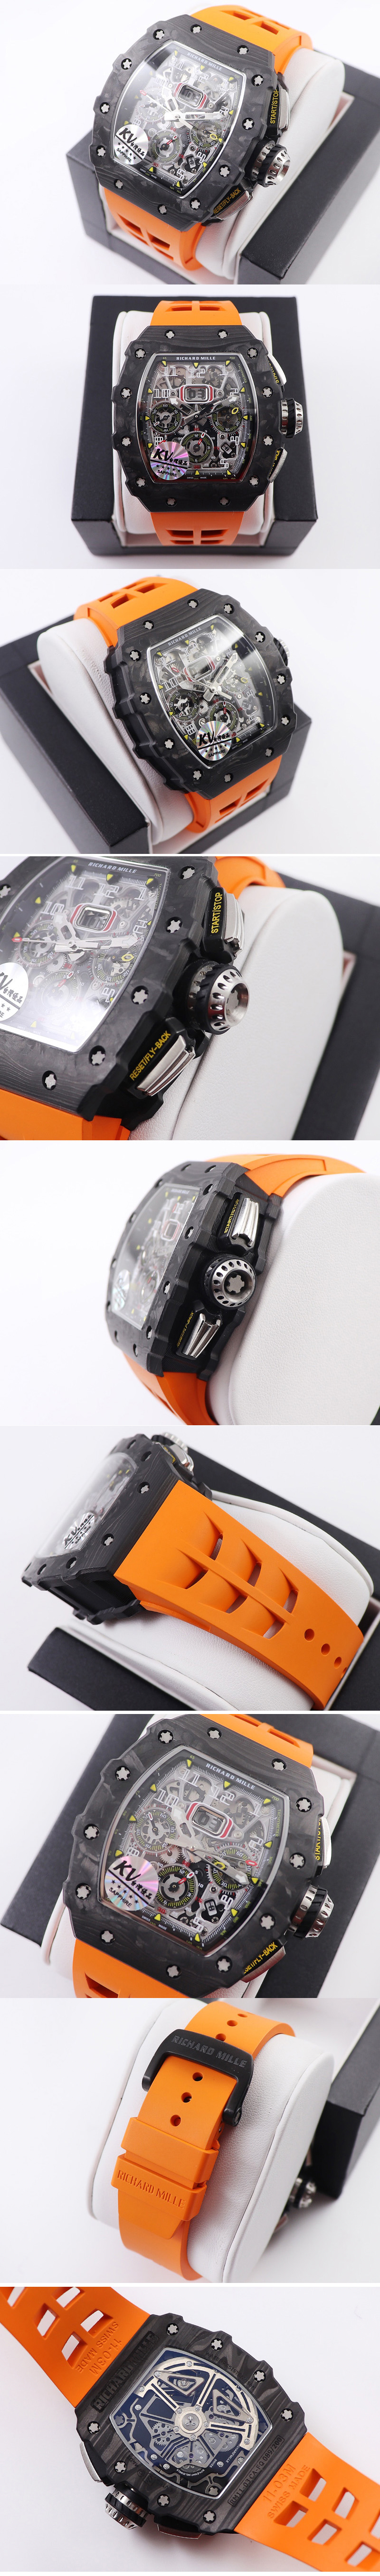 Replica Richard Mille RM011 NTPT Chrono KVF 1:1 Best Edition Crystal Dial on Orange Rubber Strap A7750